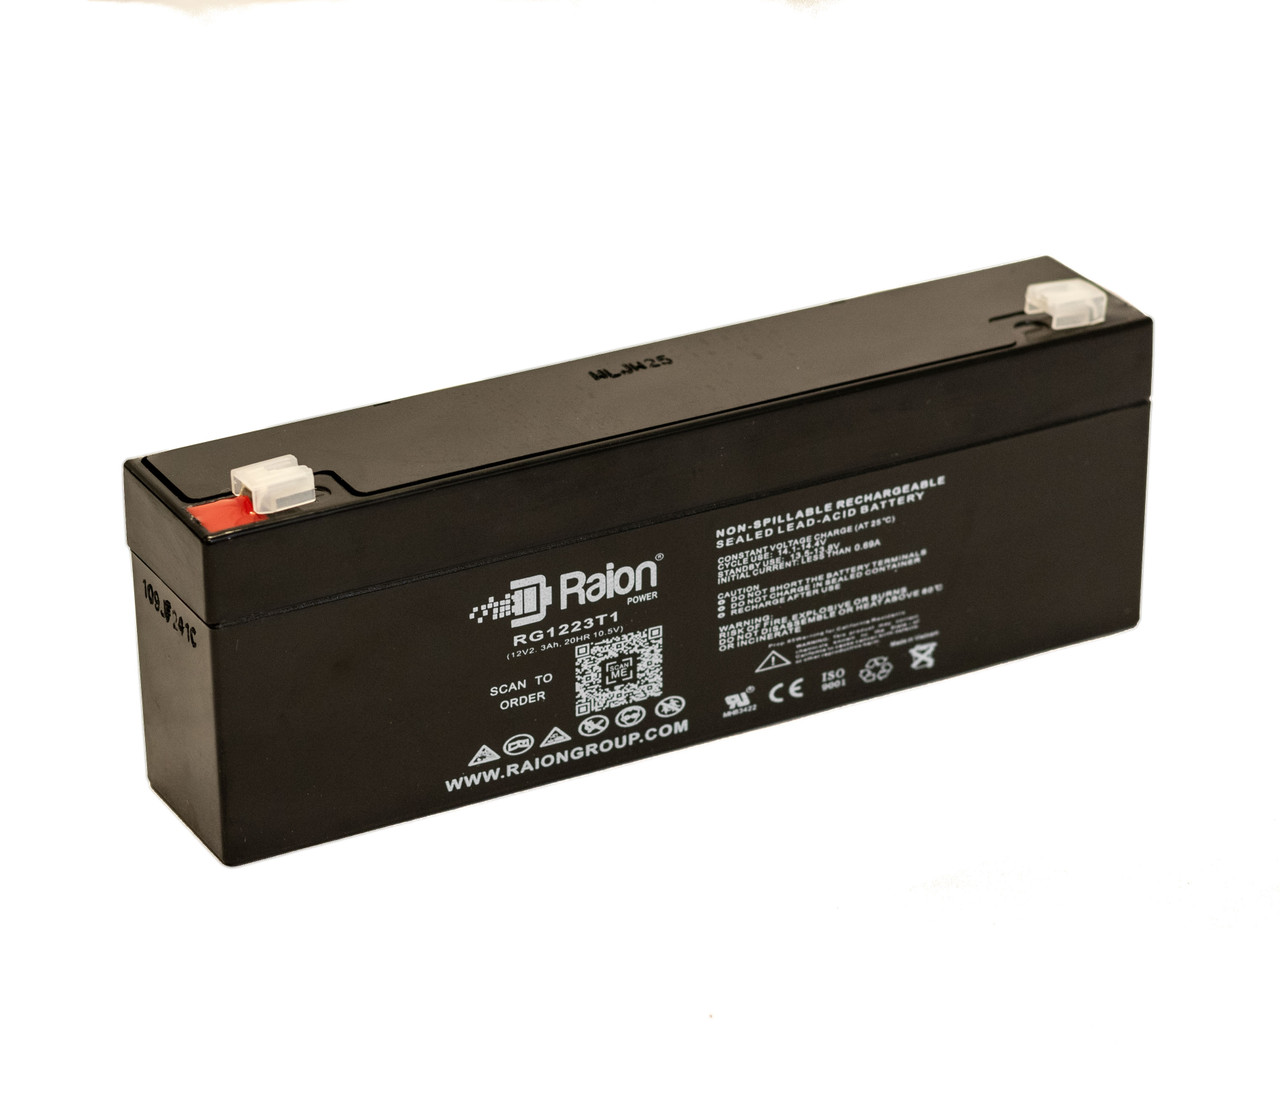 Raion Power RG1223T1 Replacement Battery for Duracell DURA12-2.3F